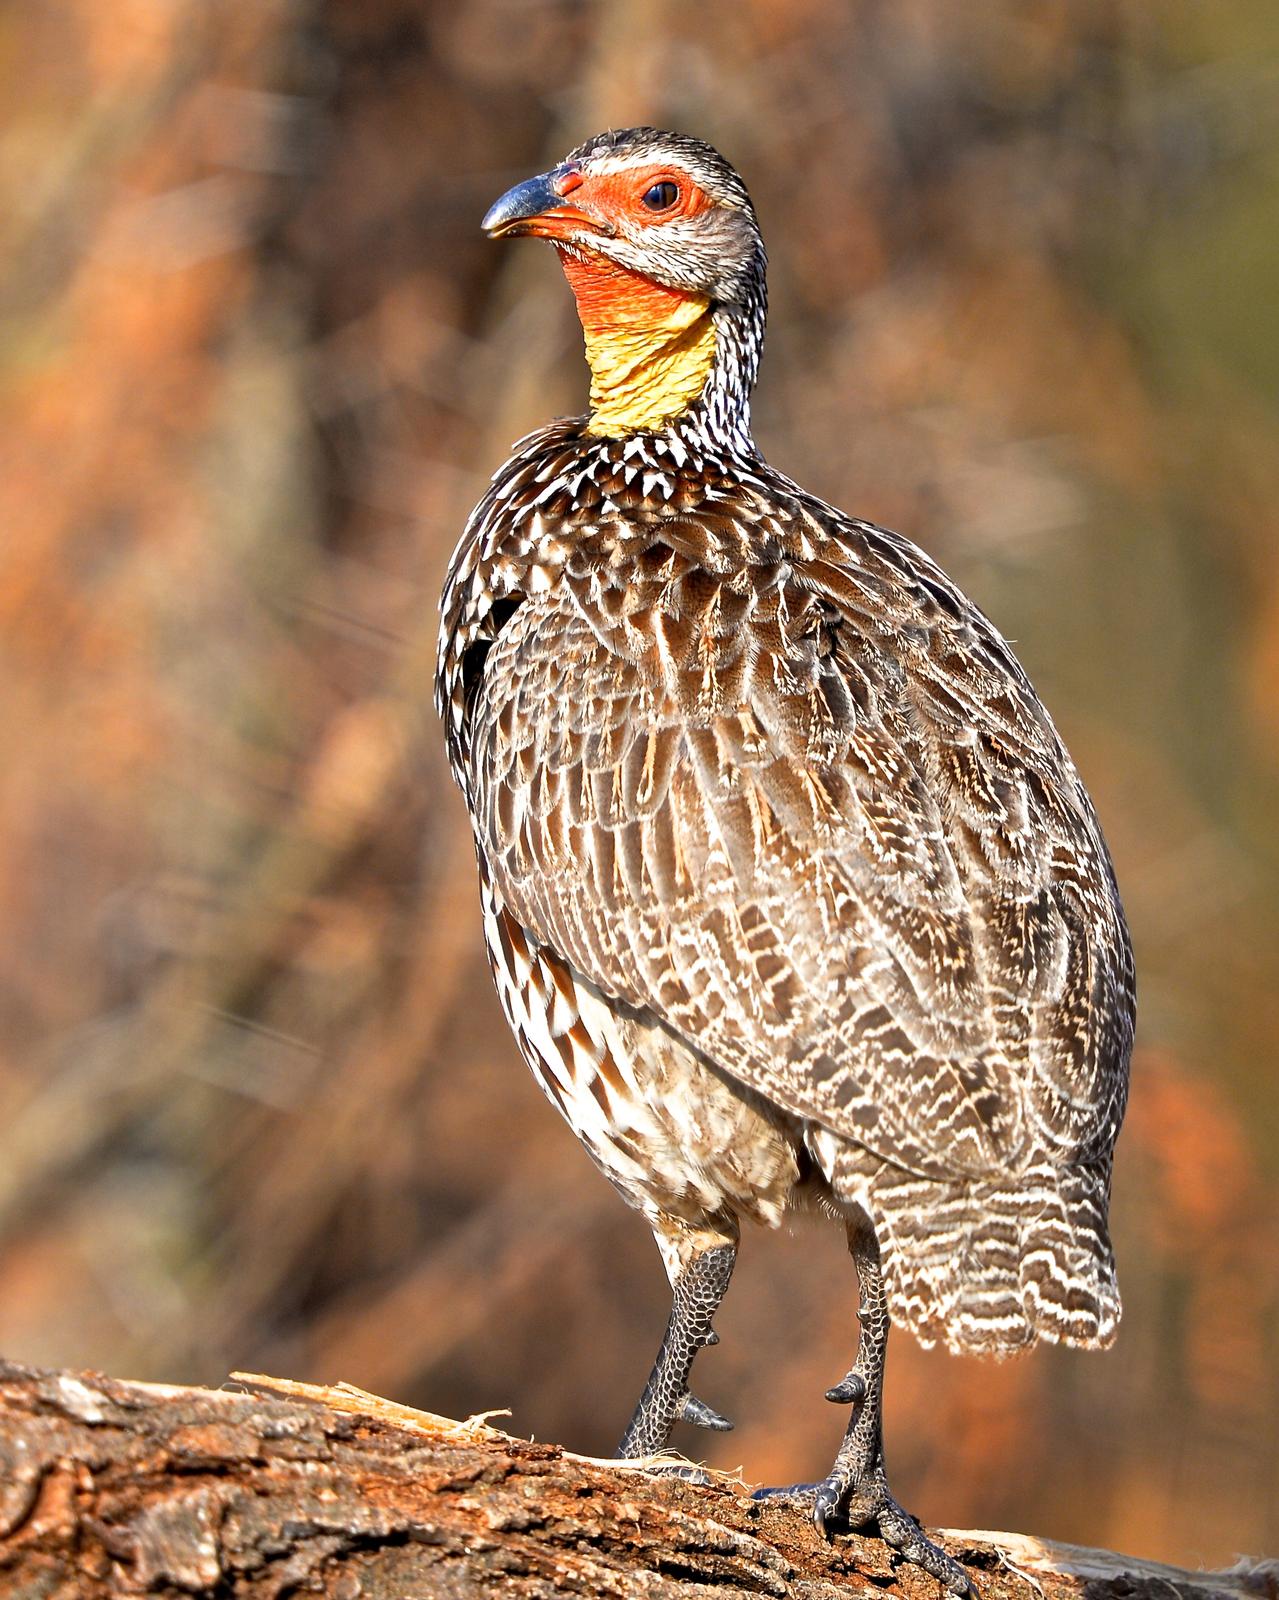 Yellow-necked Francolin Photo by Gerald Friesen